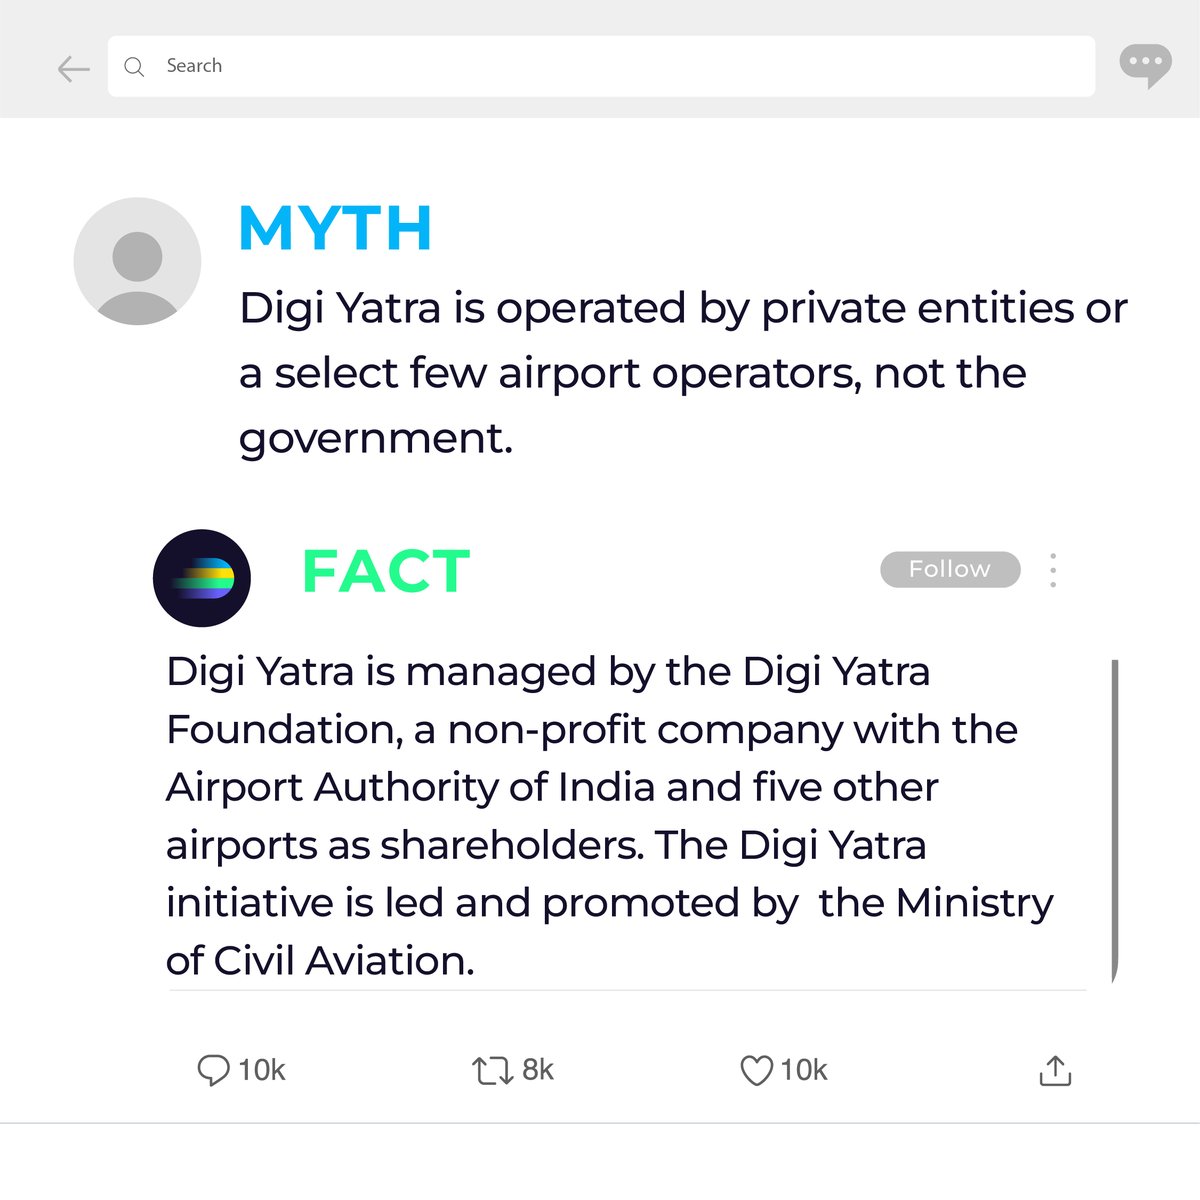 Separating myths from facts! 💡

Digi Yatra is managed by the non-profit company - Digi Yatra Foundation and is promoted by the Ministry of Civil Aviation.

Stay informed, stay secure!

Download the Digi Yatra App now!
Available on IOS and Android.
#DigiYatra #MythsVsFacts